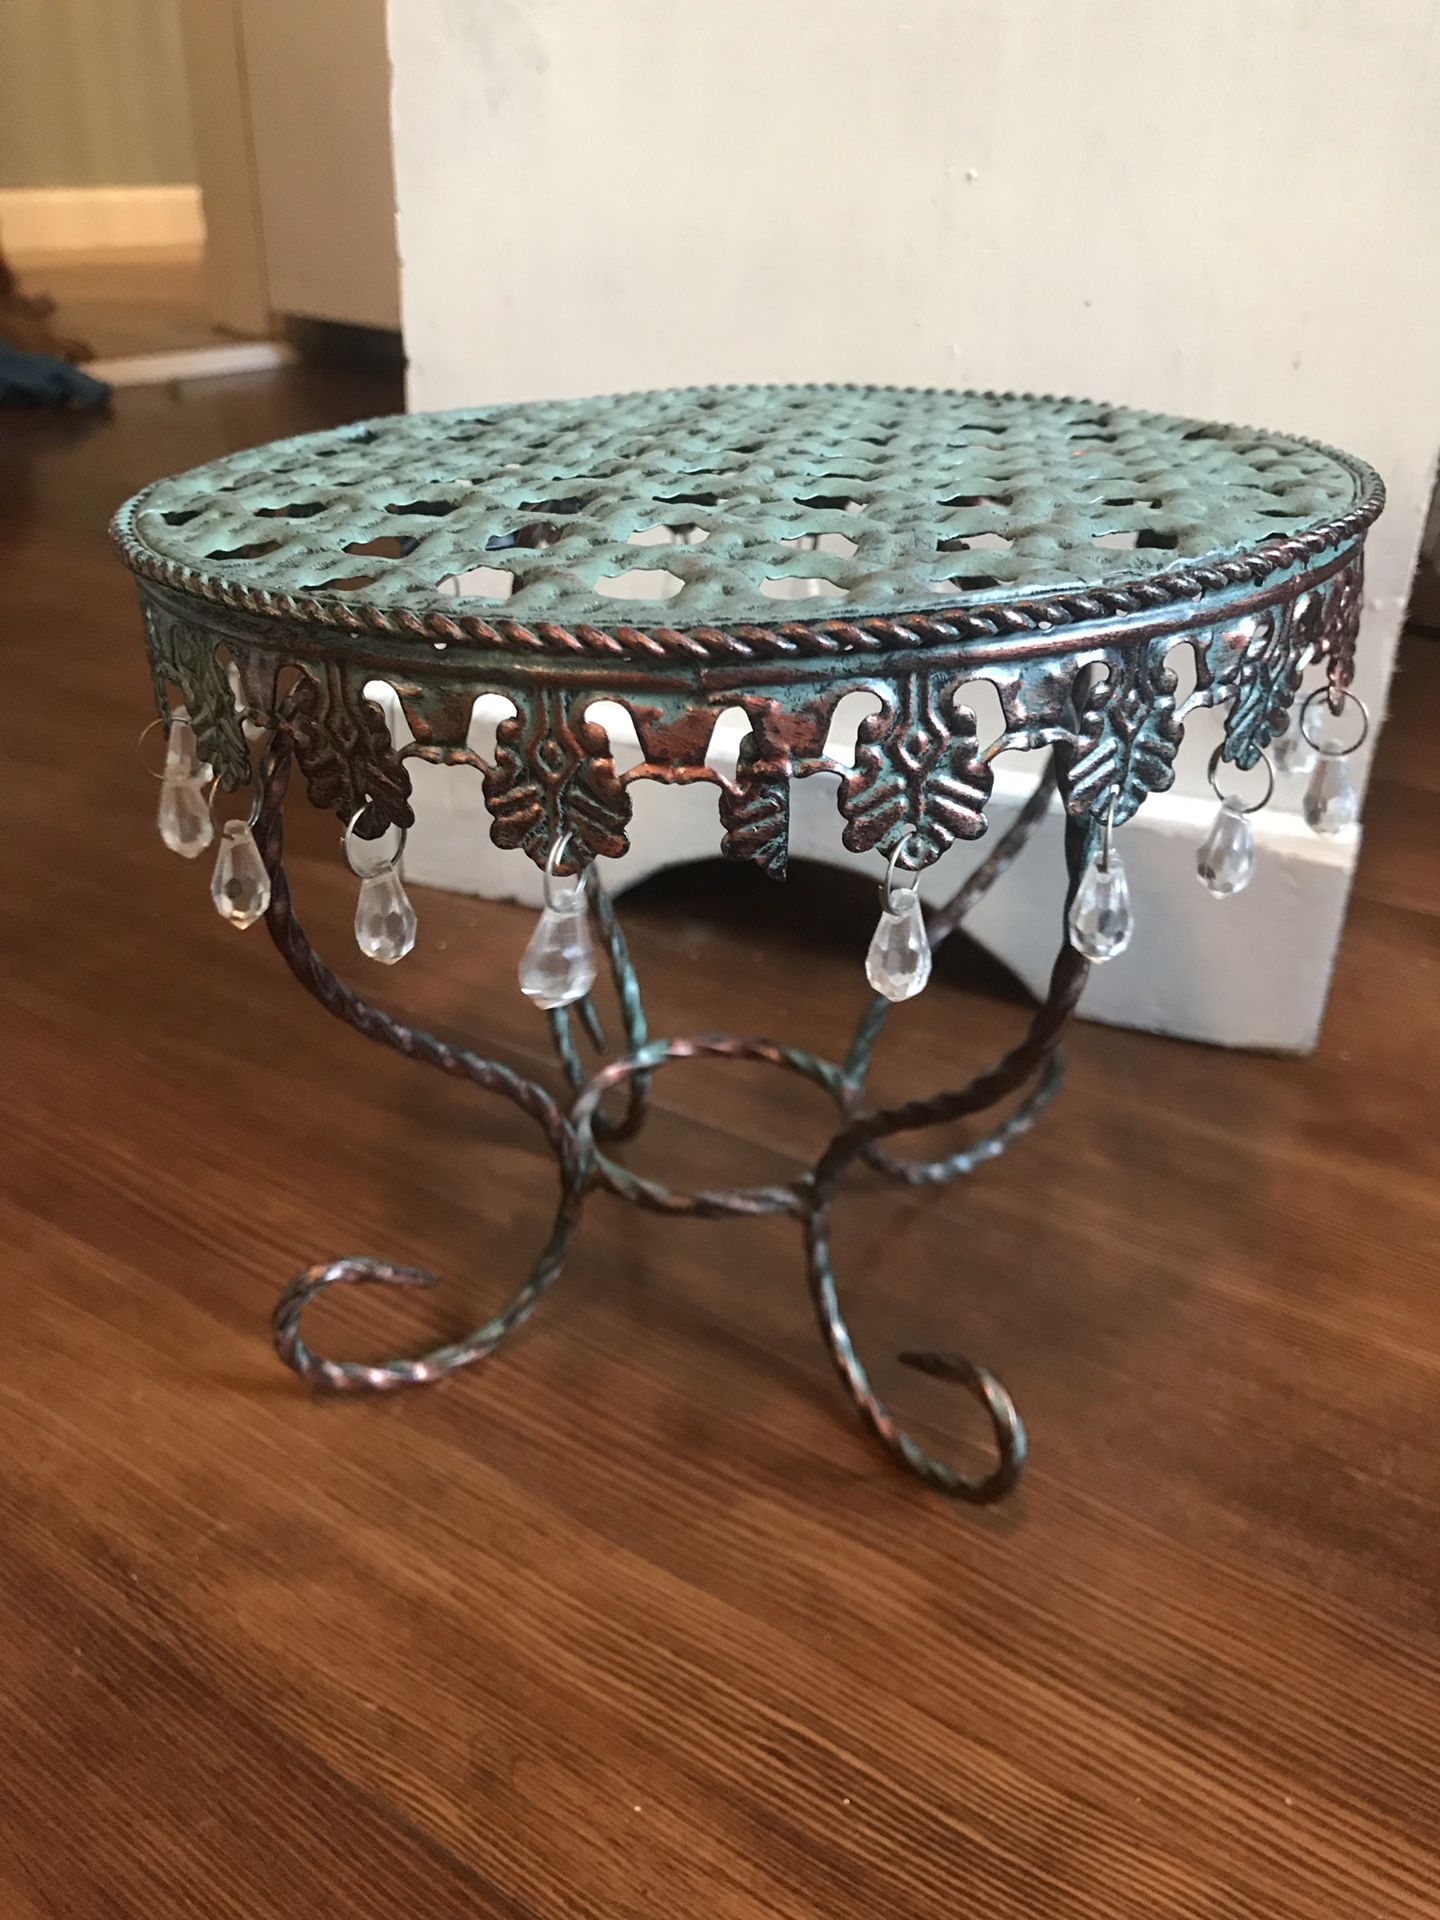 Little metal plant stand PENDING SALE